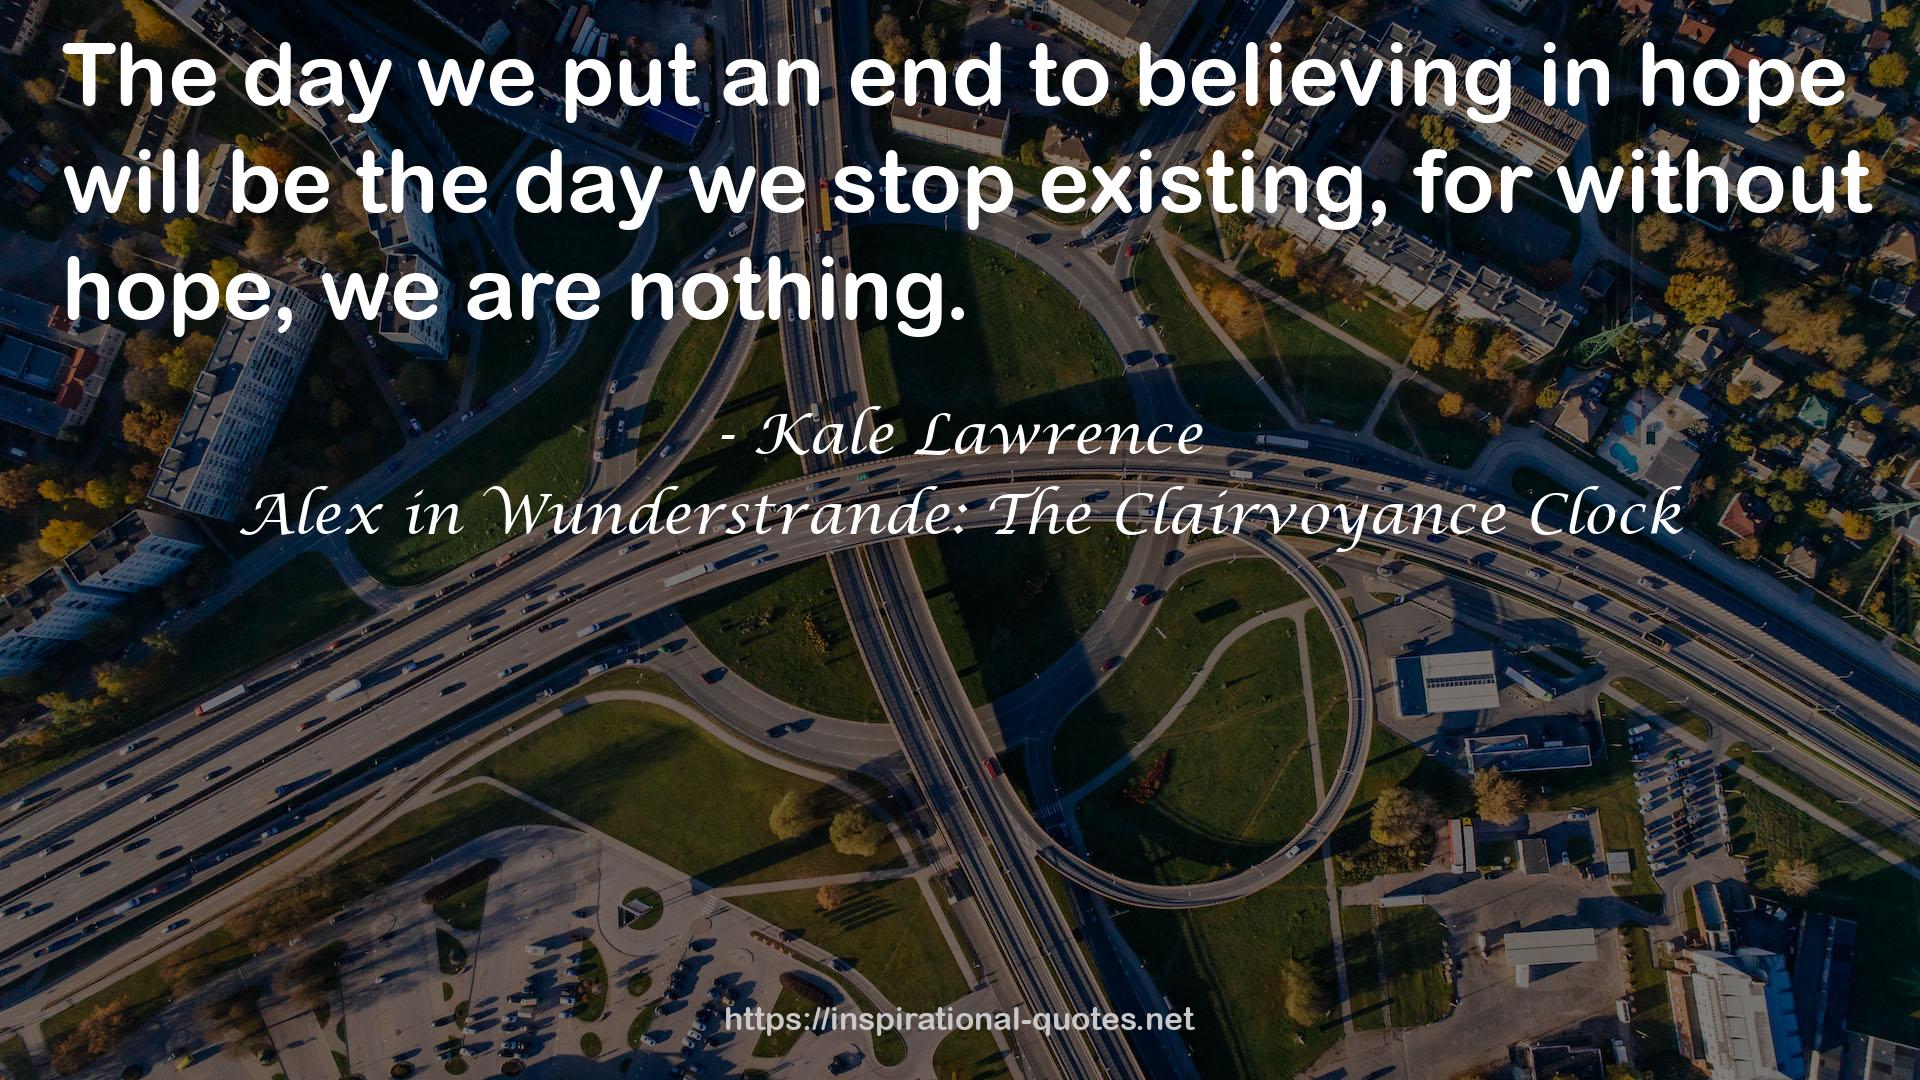 Kale Lawrence QUOTES